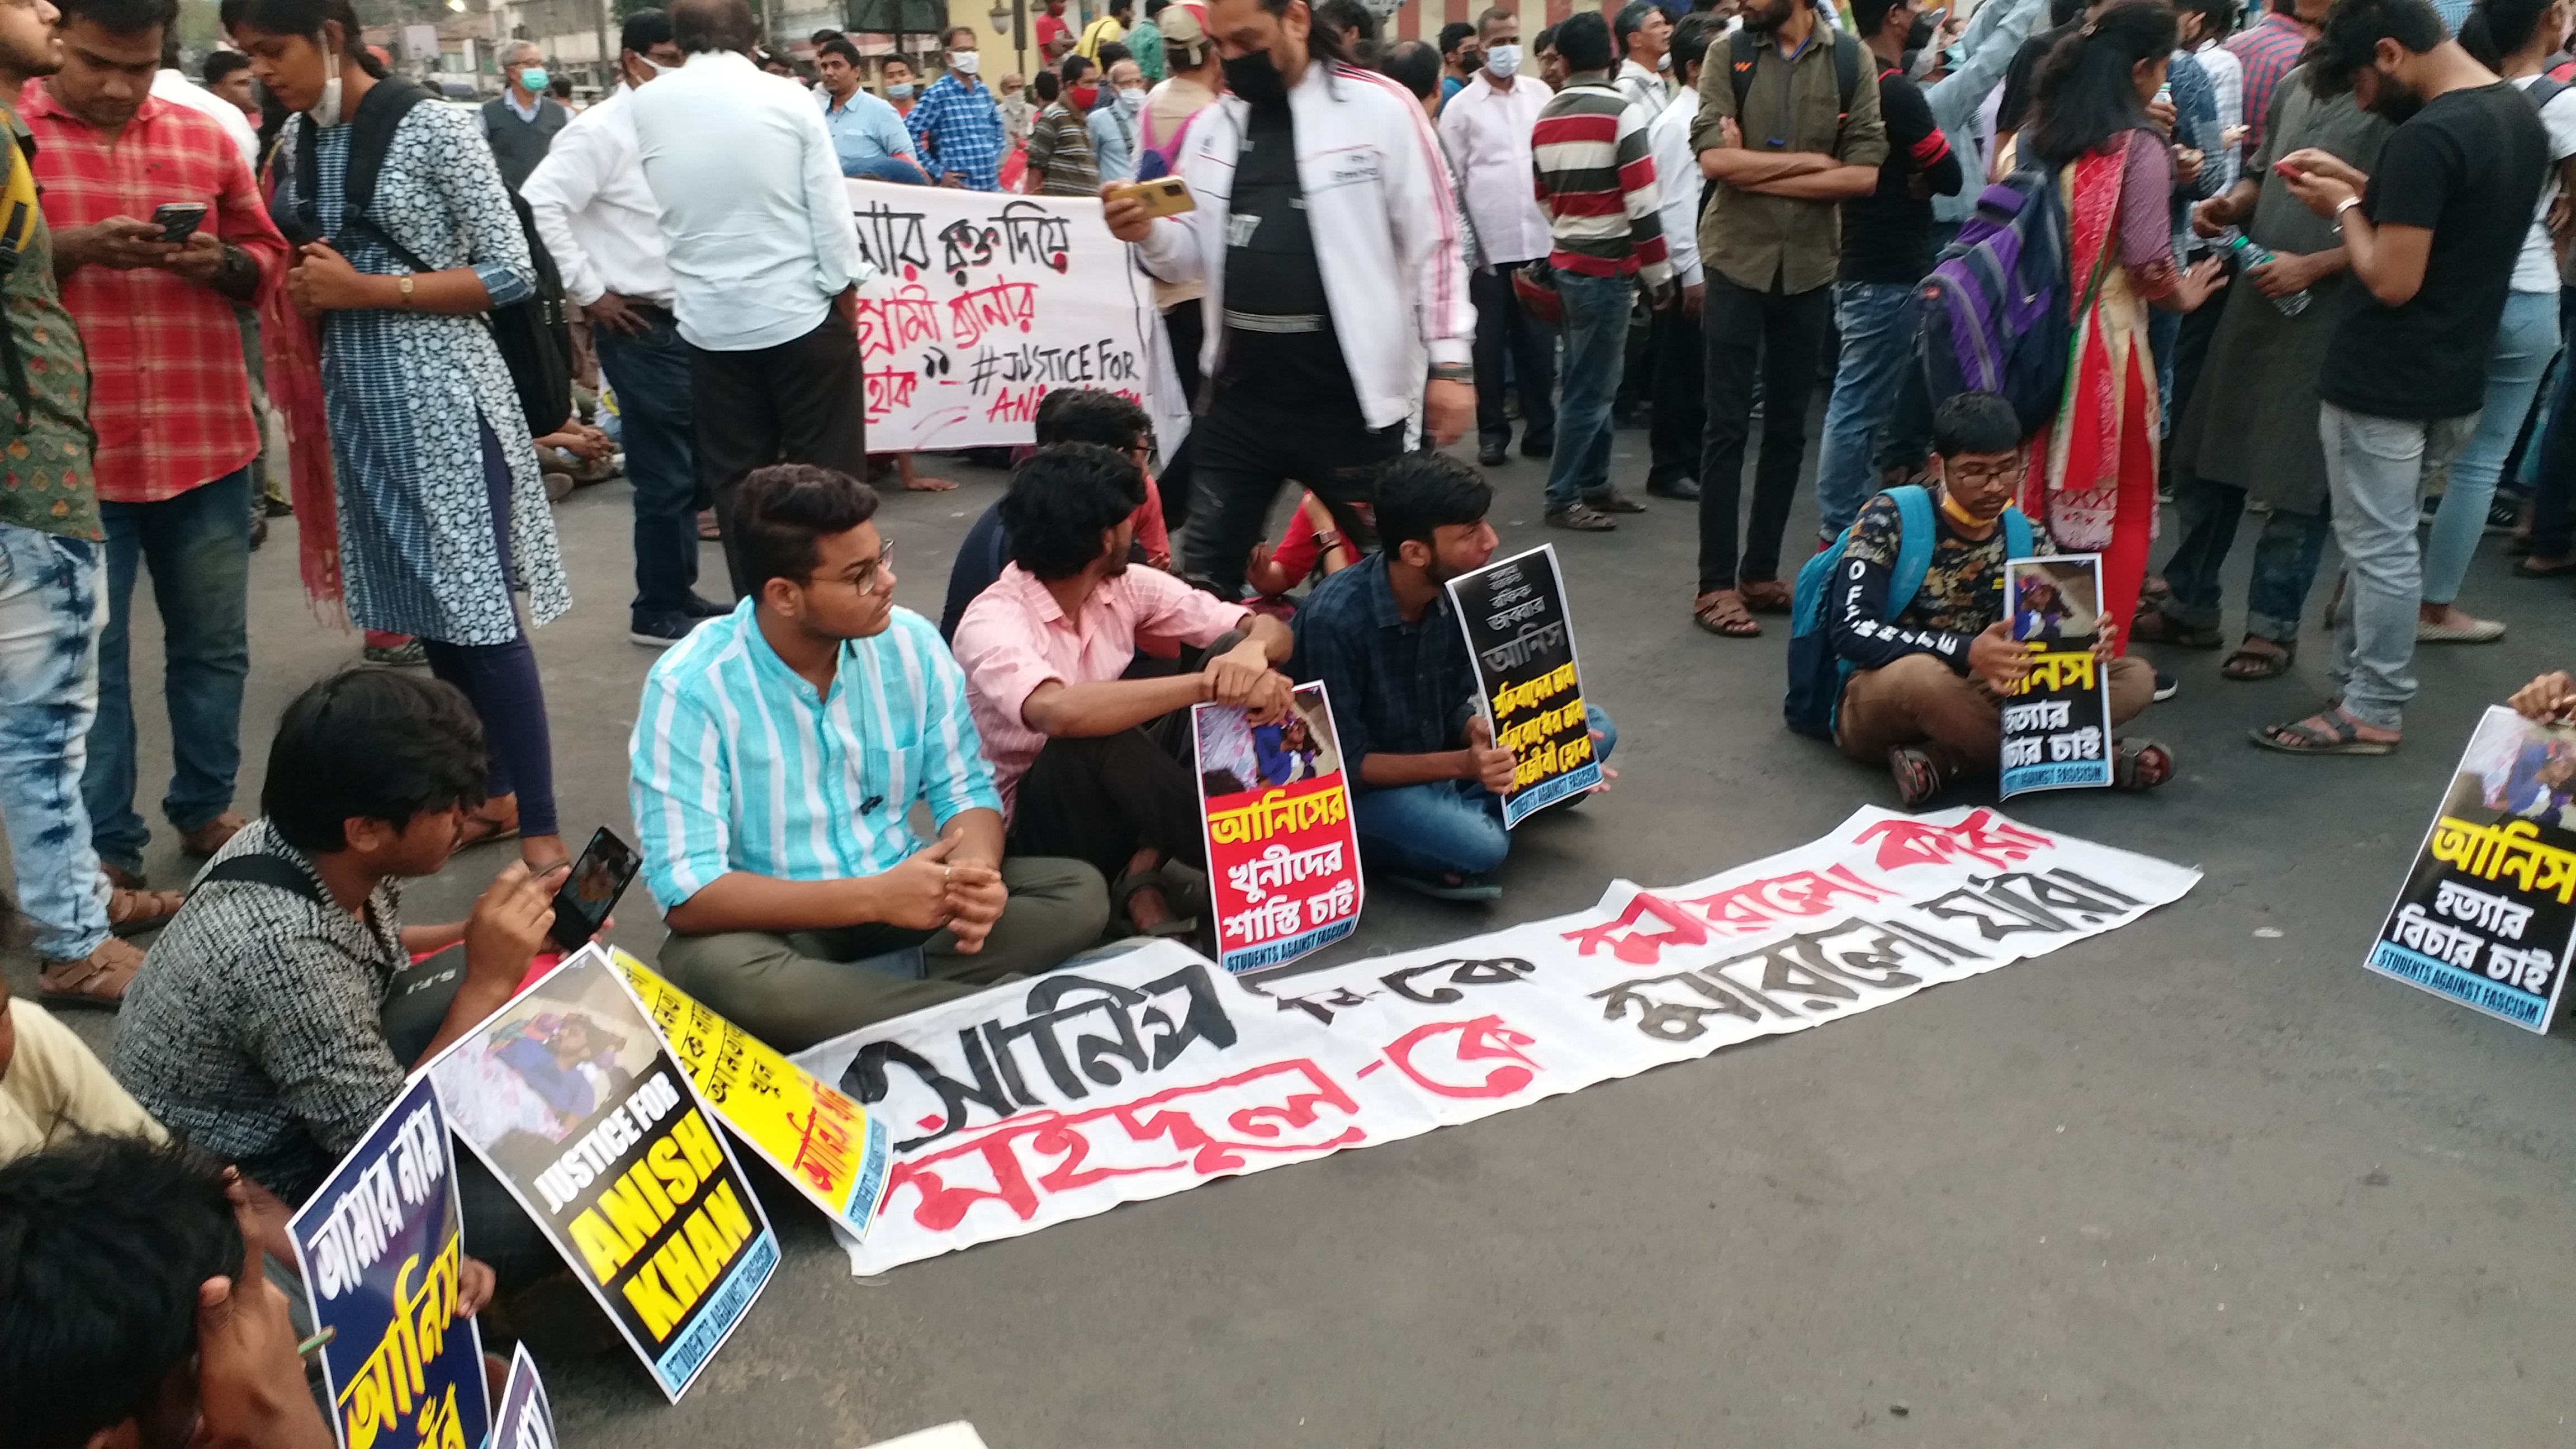 Student organizations protest in Kolkata against the killing of Anis